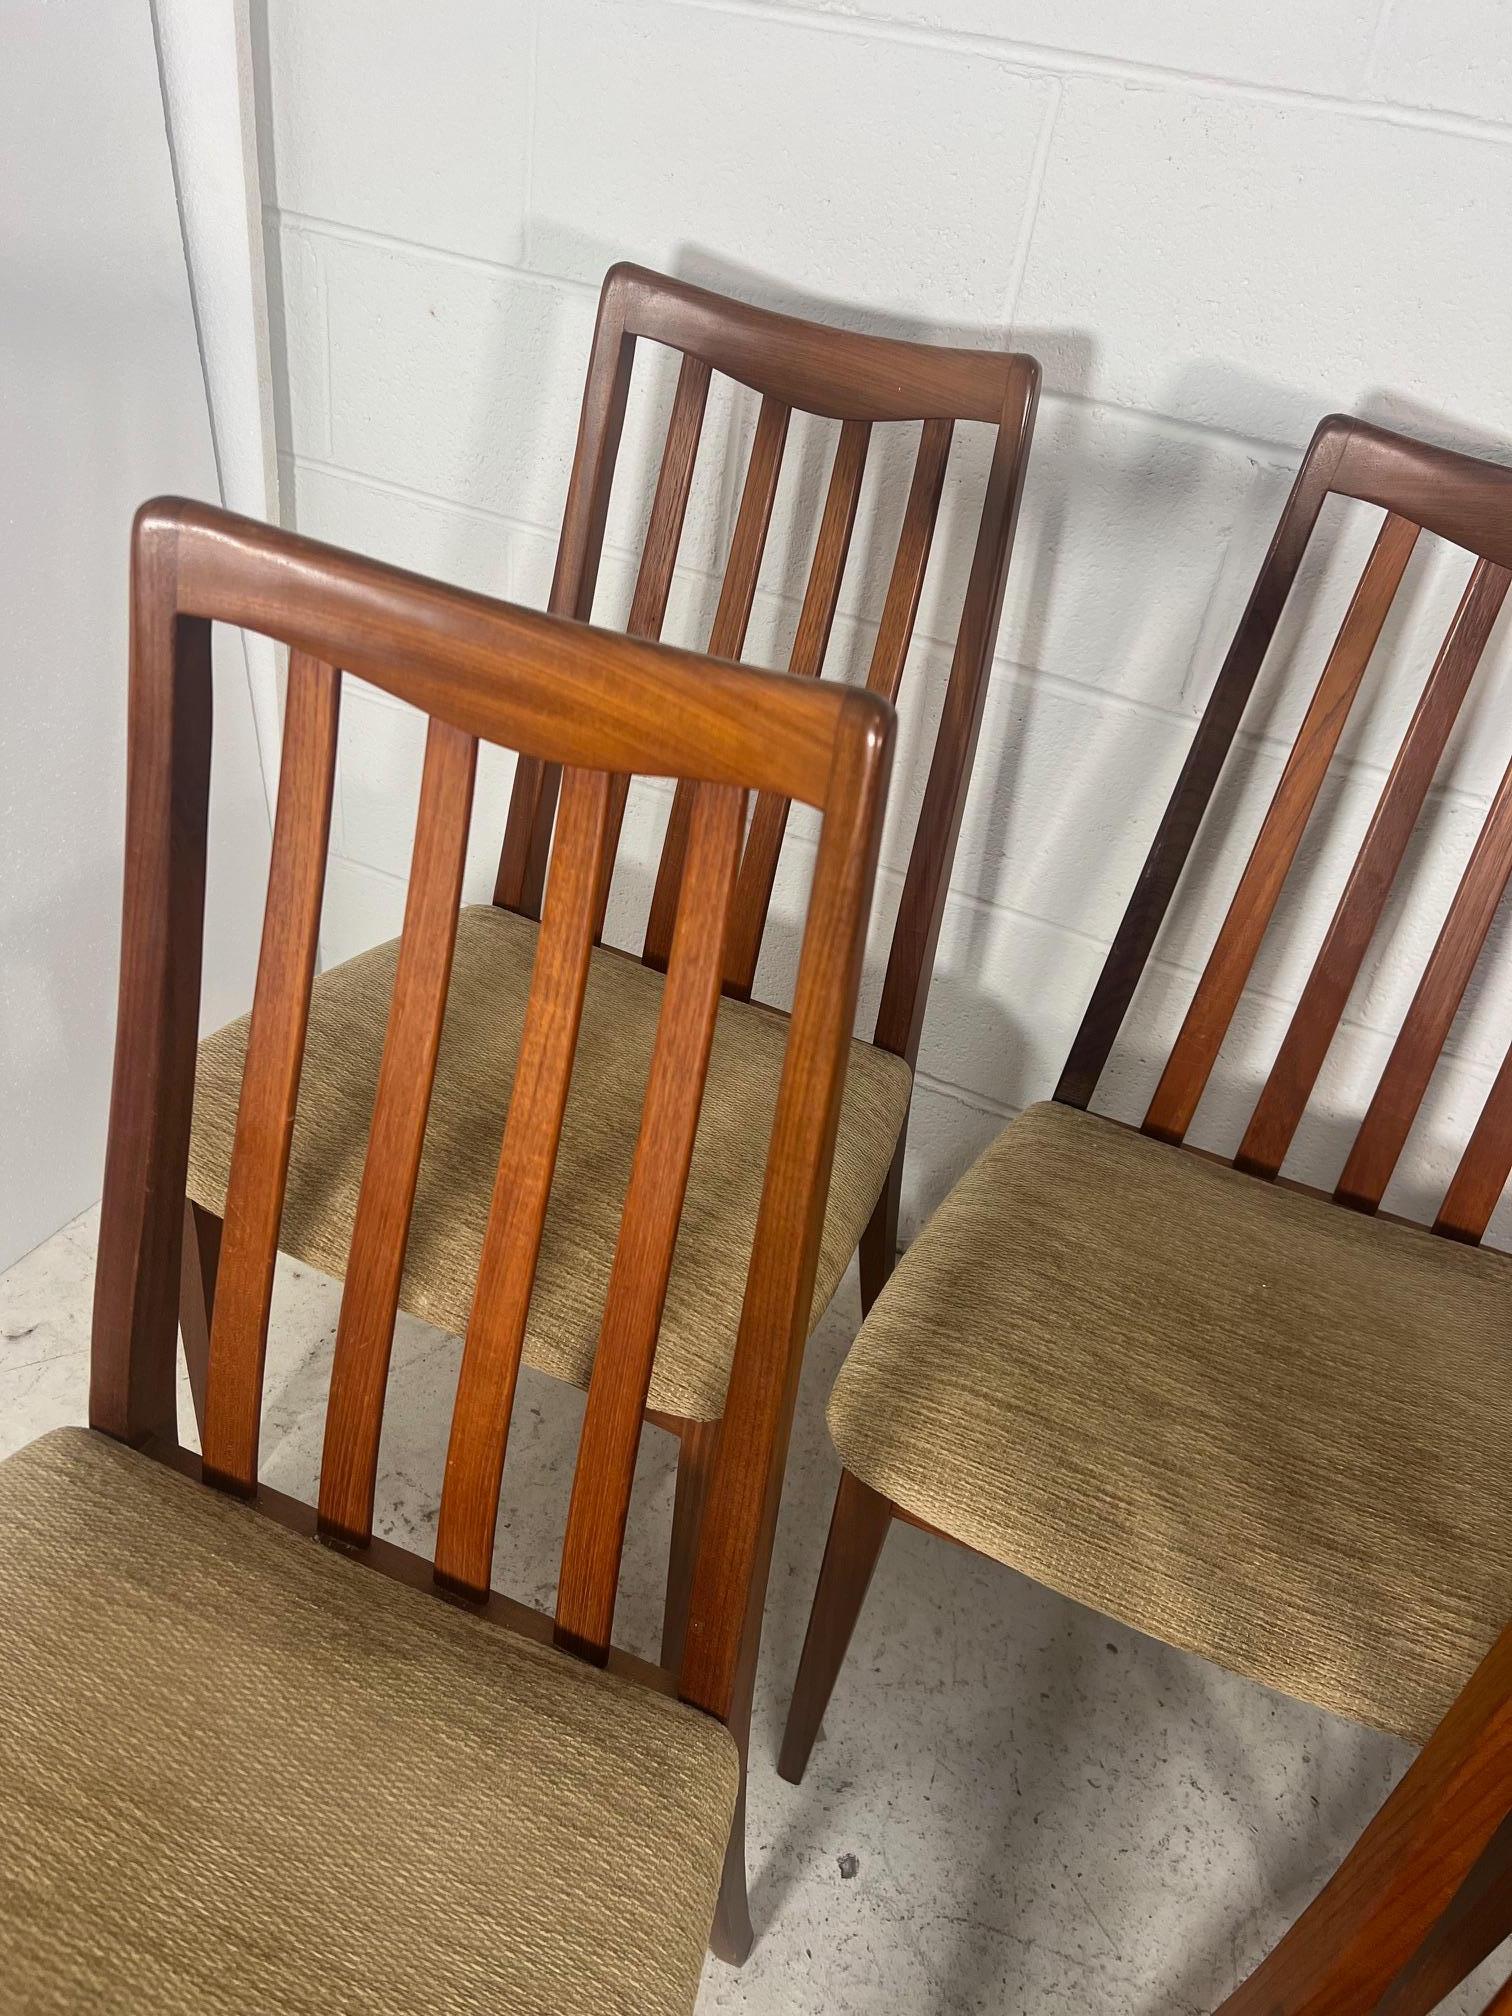 Set of 6 mid century modern teak dining chairs by G Plan.

Very good condition. Some marks on the frames as shown in photos but very nice overall. Upholstery seems to be original. Some of the chairs still have the original G Plan sticker